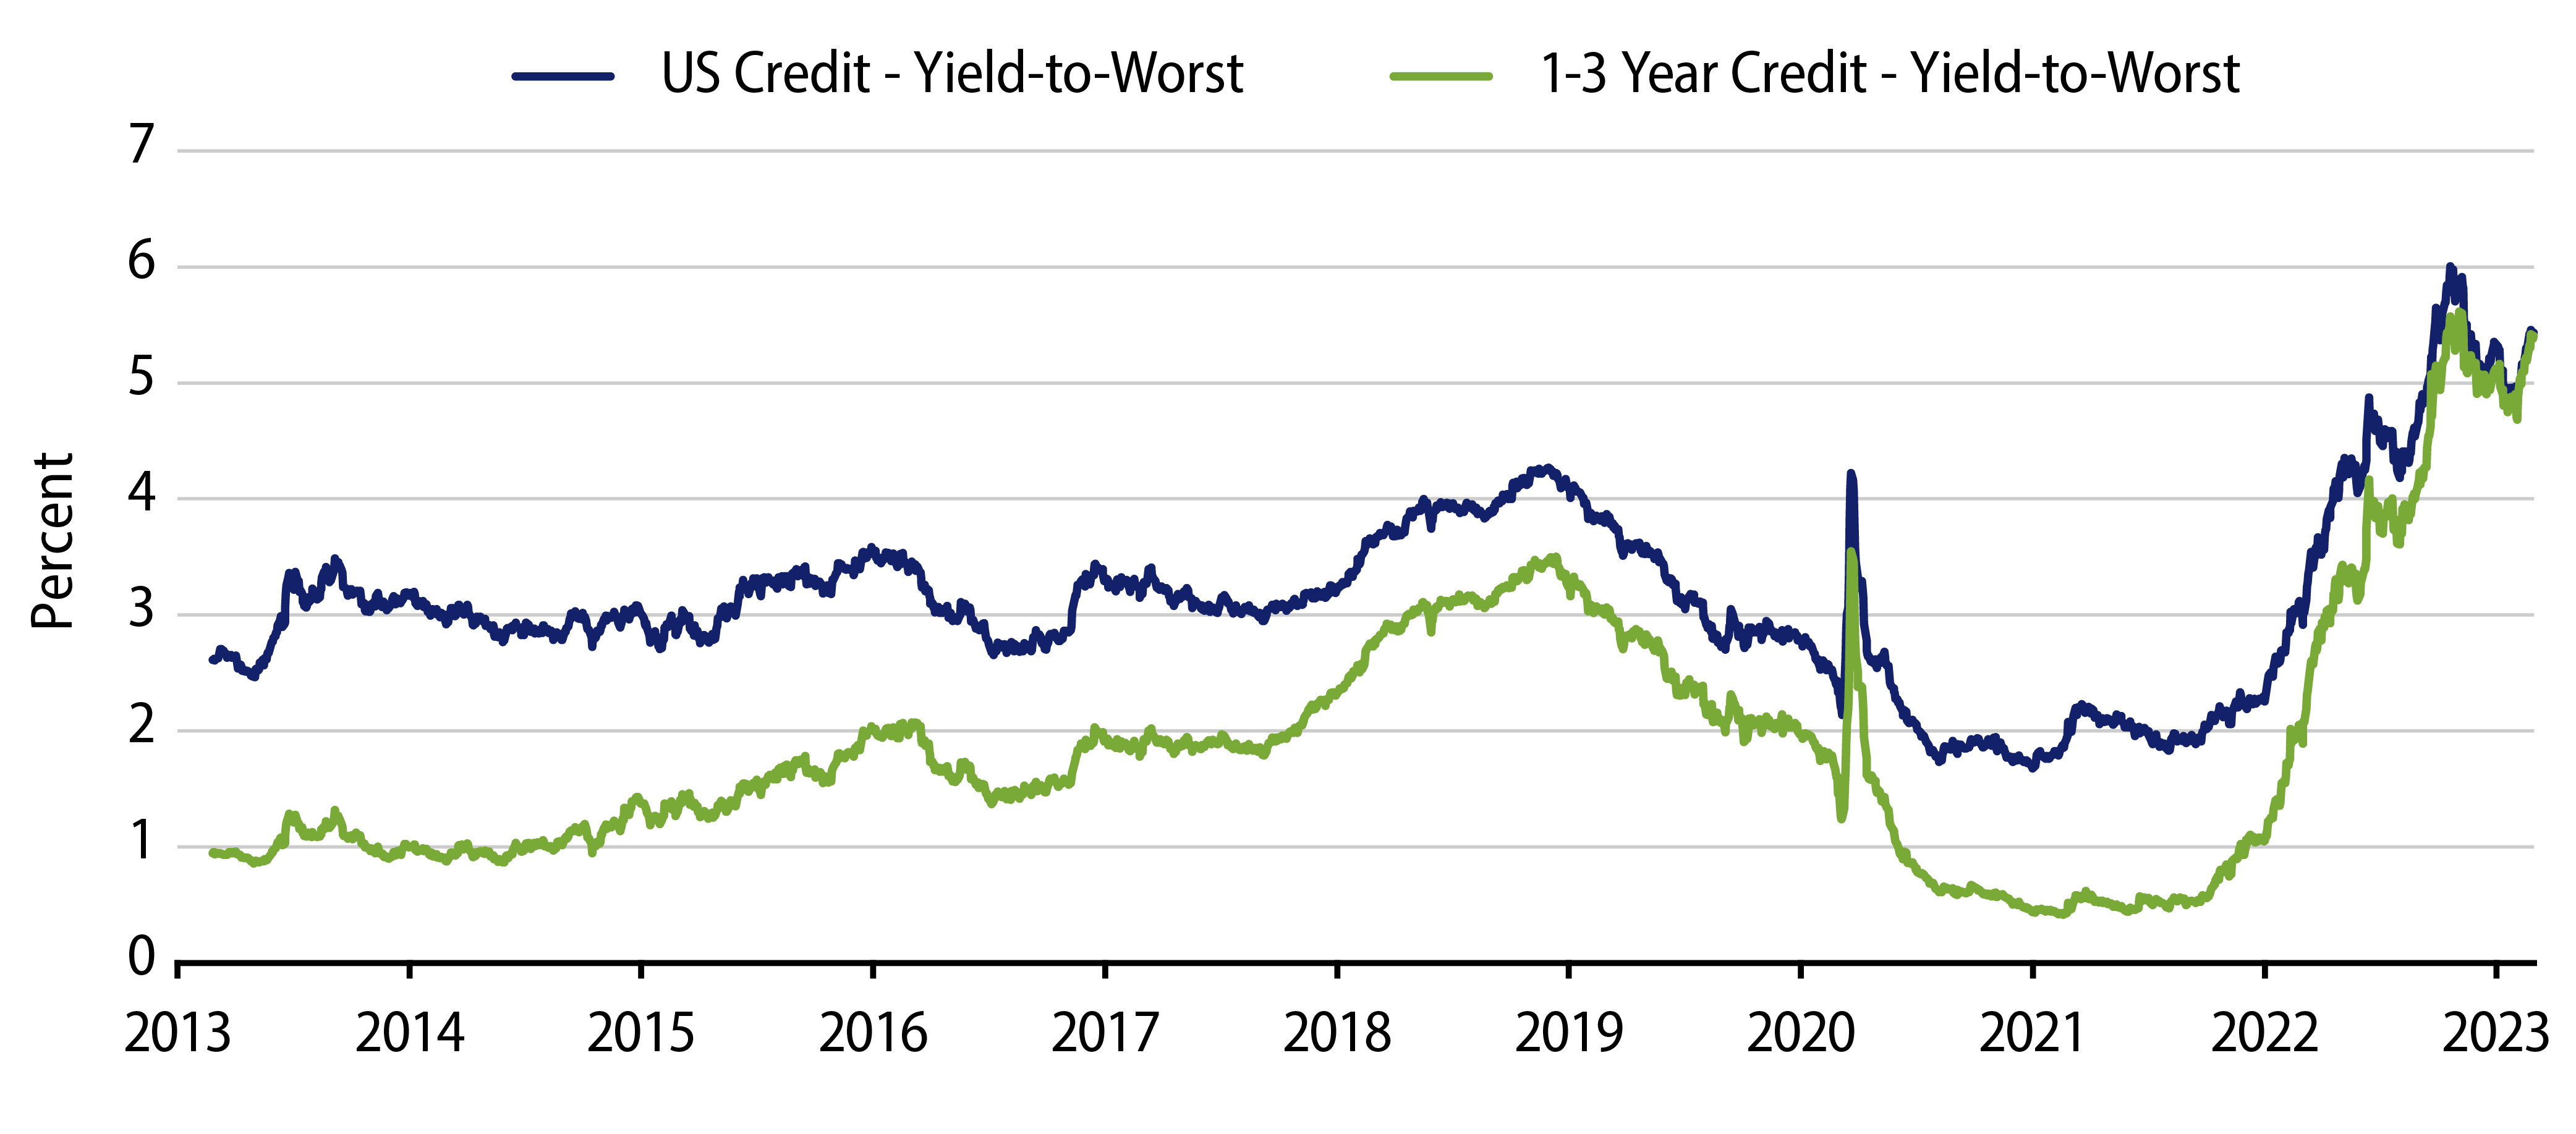 Yields on Short Maturity Corporate Bonds Have Caught Up to Longer-Maturity Issues